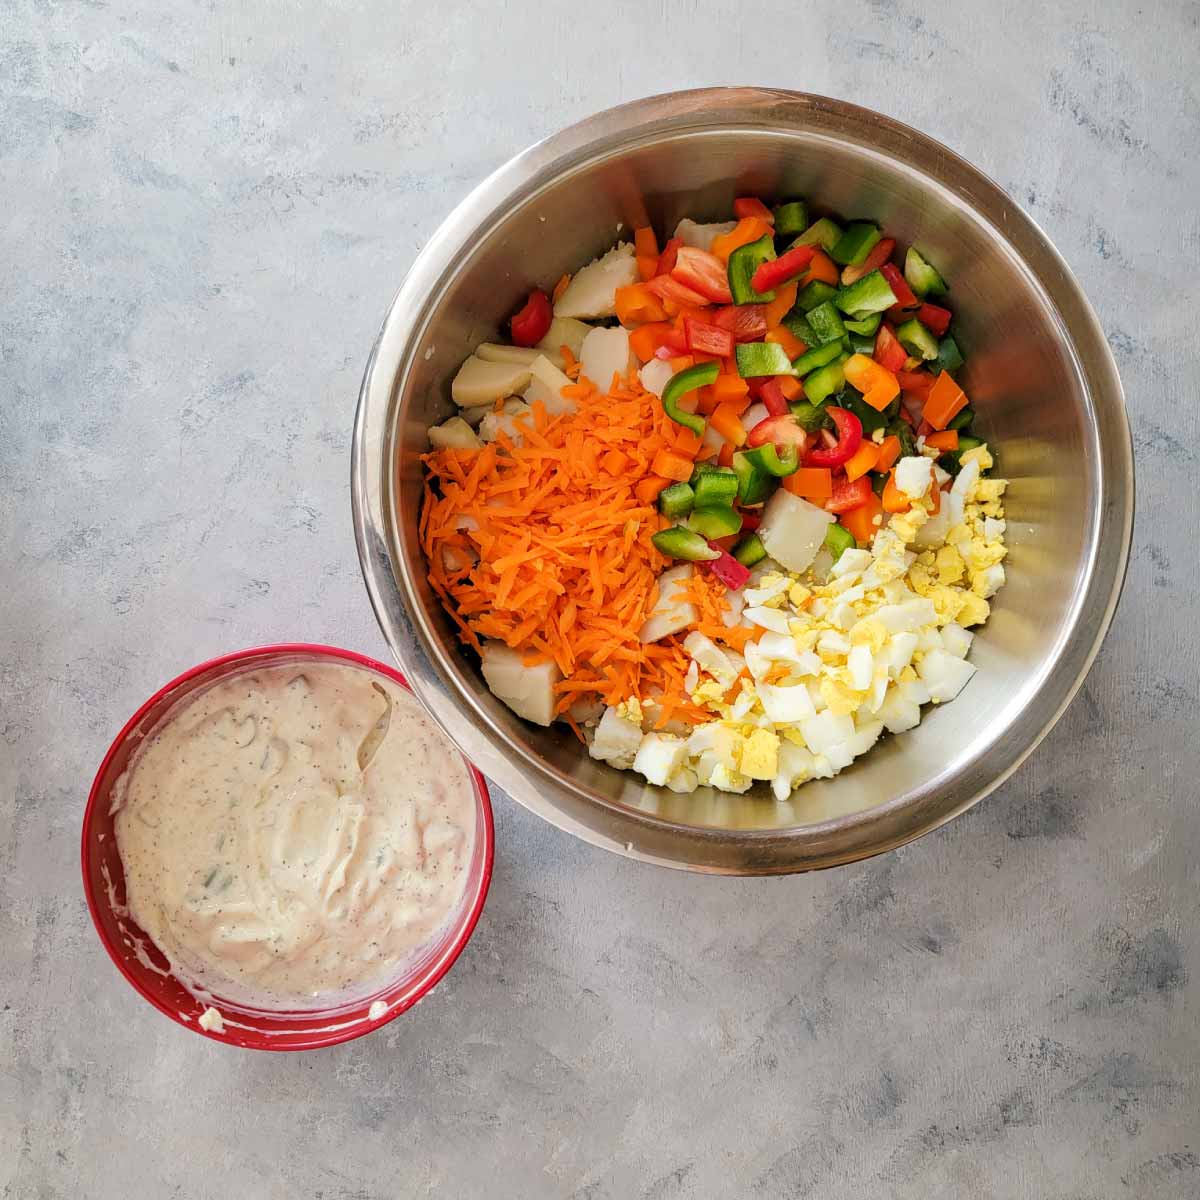 Cut potatoes, chopped peppers, chopped hard boiled eggs and shredded carrots in a large mixing bowl. The potato salad dressing is mixed already in a small prep bowl.